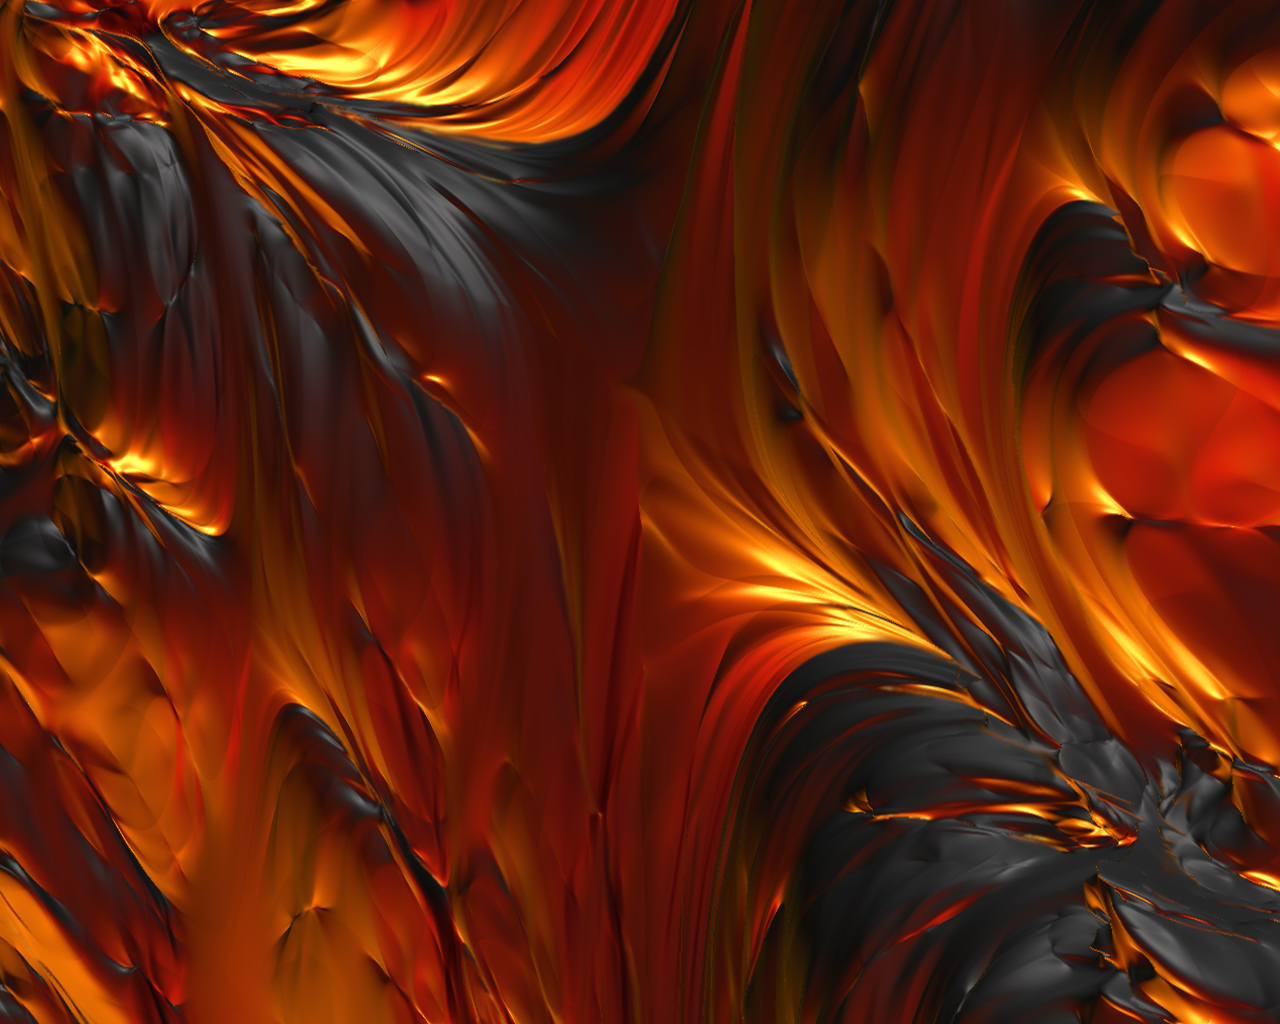 Download High quality Abstract wallpaper / 3d And Digital Art / 1280x1024